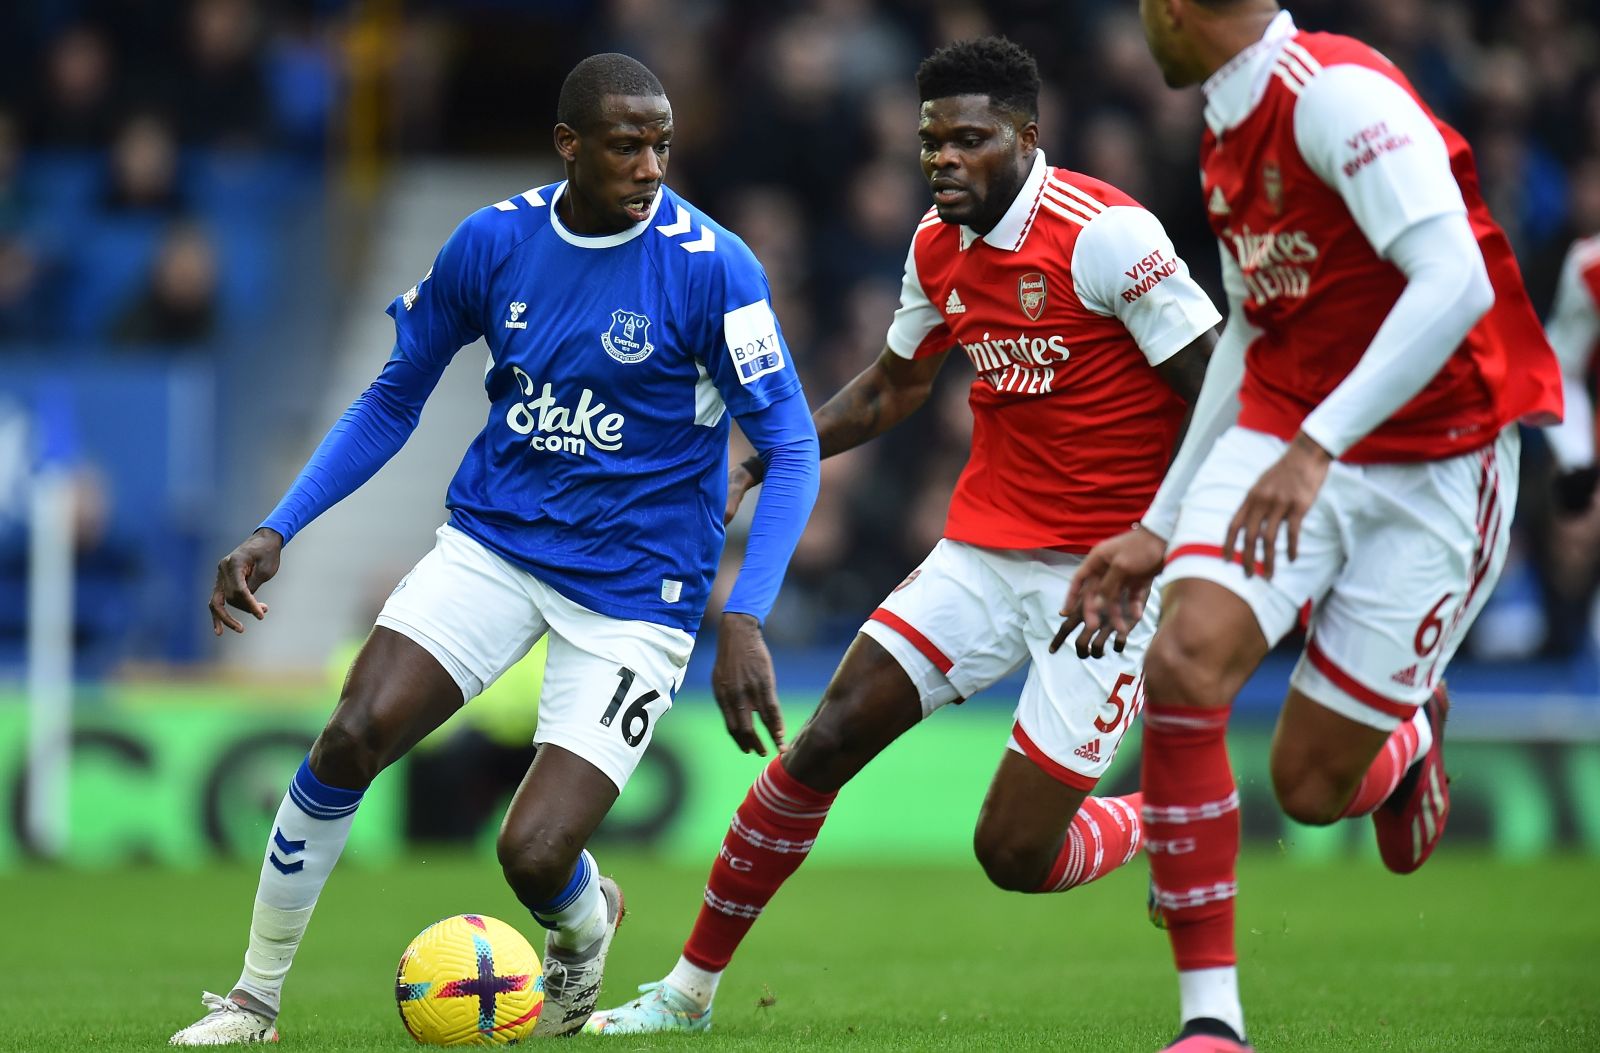 epa10446833 Everton's Abdoulaye Doucoure (L) in action against Arsenal's Thomas Partey (R) during the English Premier League soccer match between Everton FC and Arsenal London in Liverpool, Britain, 04 February 2023.  EPA/Peter Powell EDITORIAL USE ONLY. No use with unauthorized audio, video, data, fixture lists, club/league logos or 'live' services. Online in-match use limited to 120 images, no video emulation. No use in betting, games or single club/league/player publications